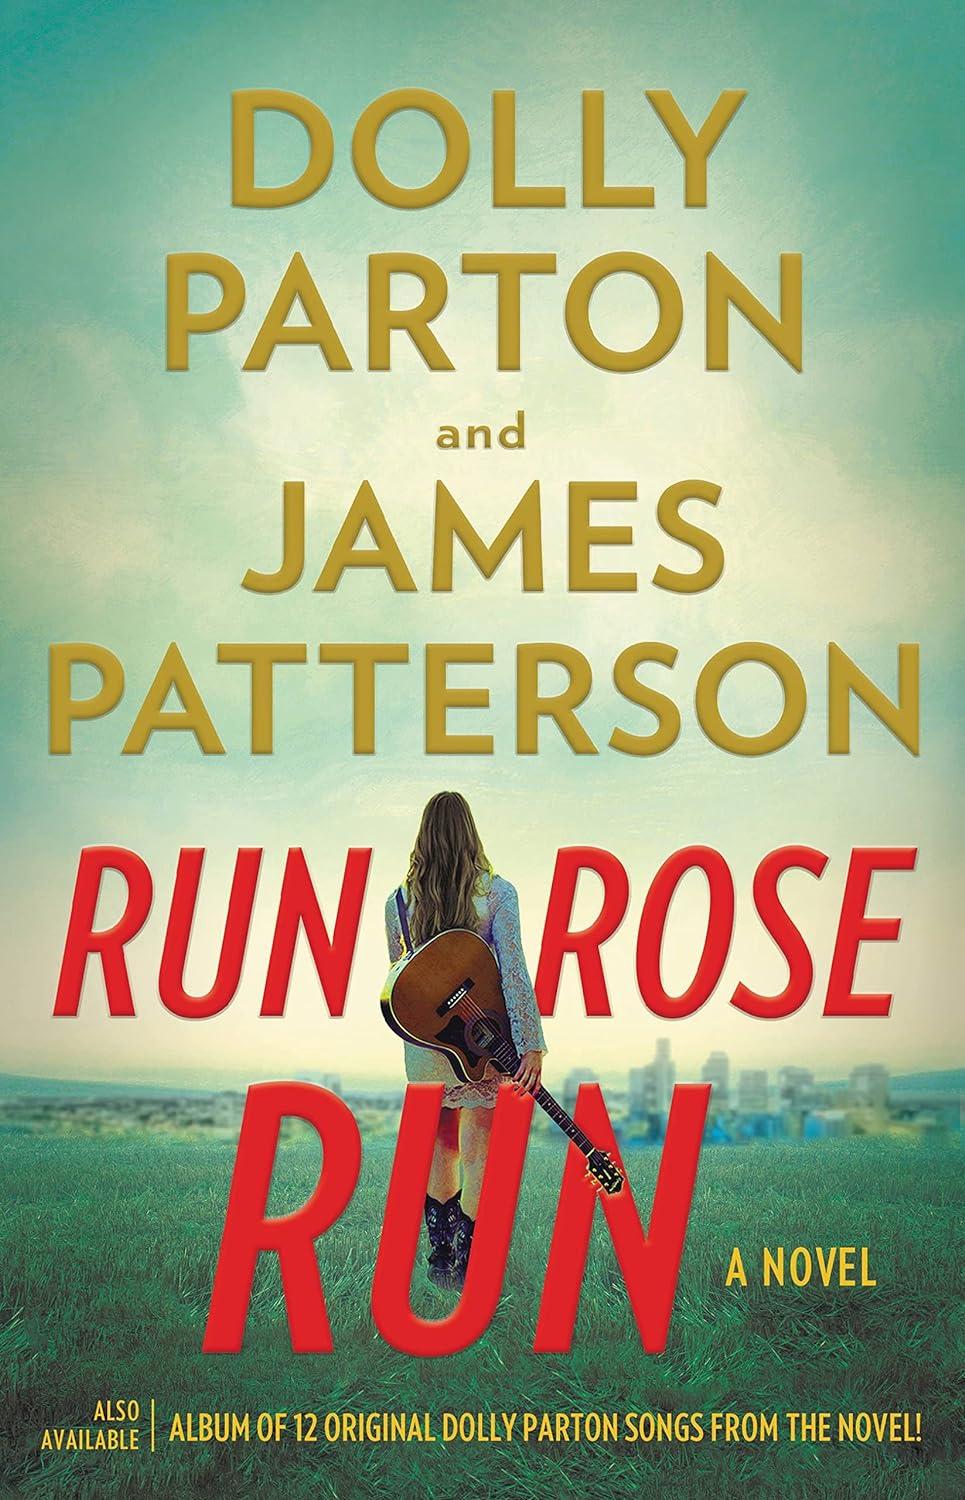 "Run, Rose, Run," by Dolly Parton and James Patterson.